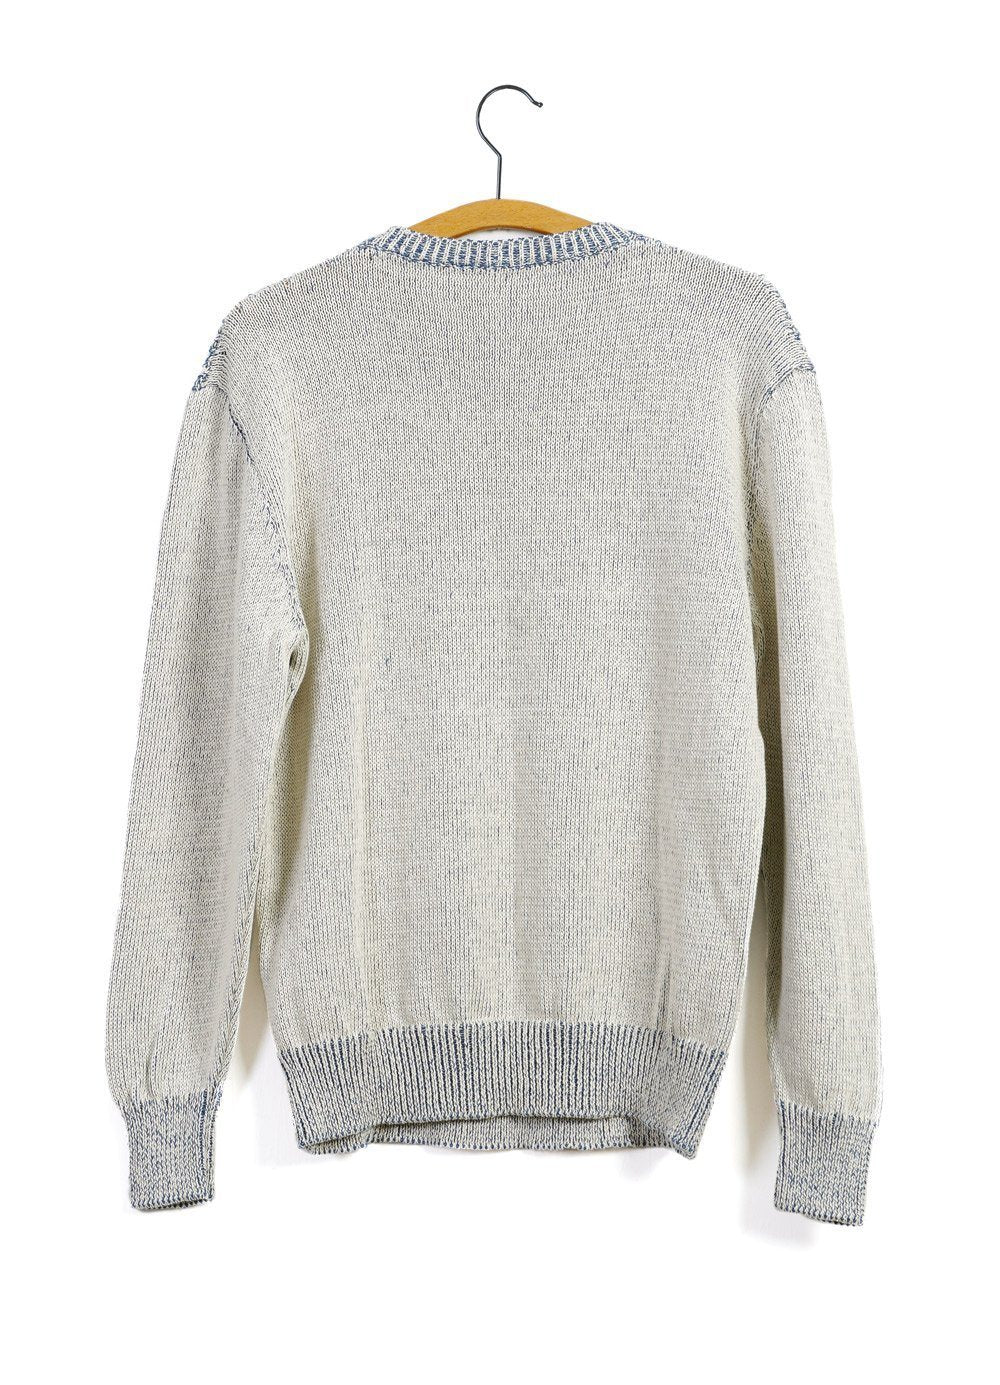 PATENTED ARAN | Cable Knit Sweater | Blue Offwhite | 240€ -Inis Meáin- HANSEN Garments